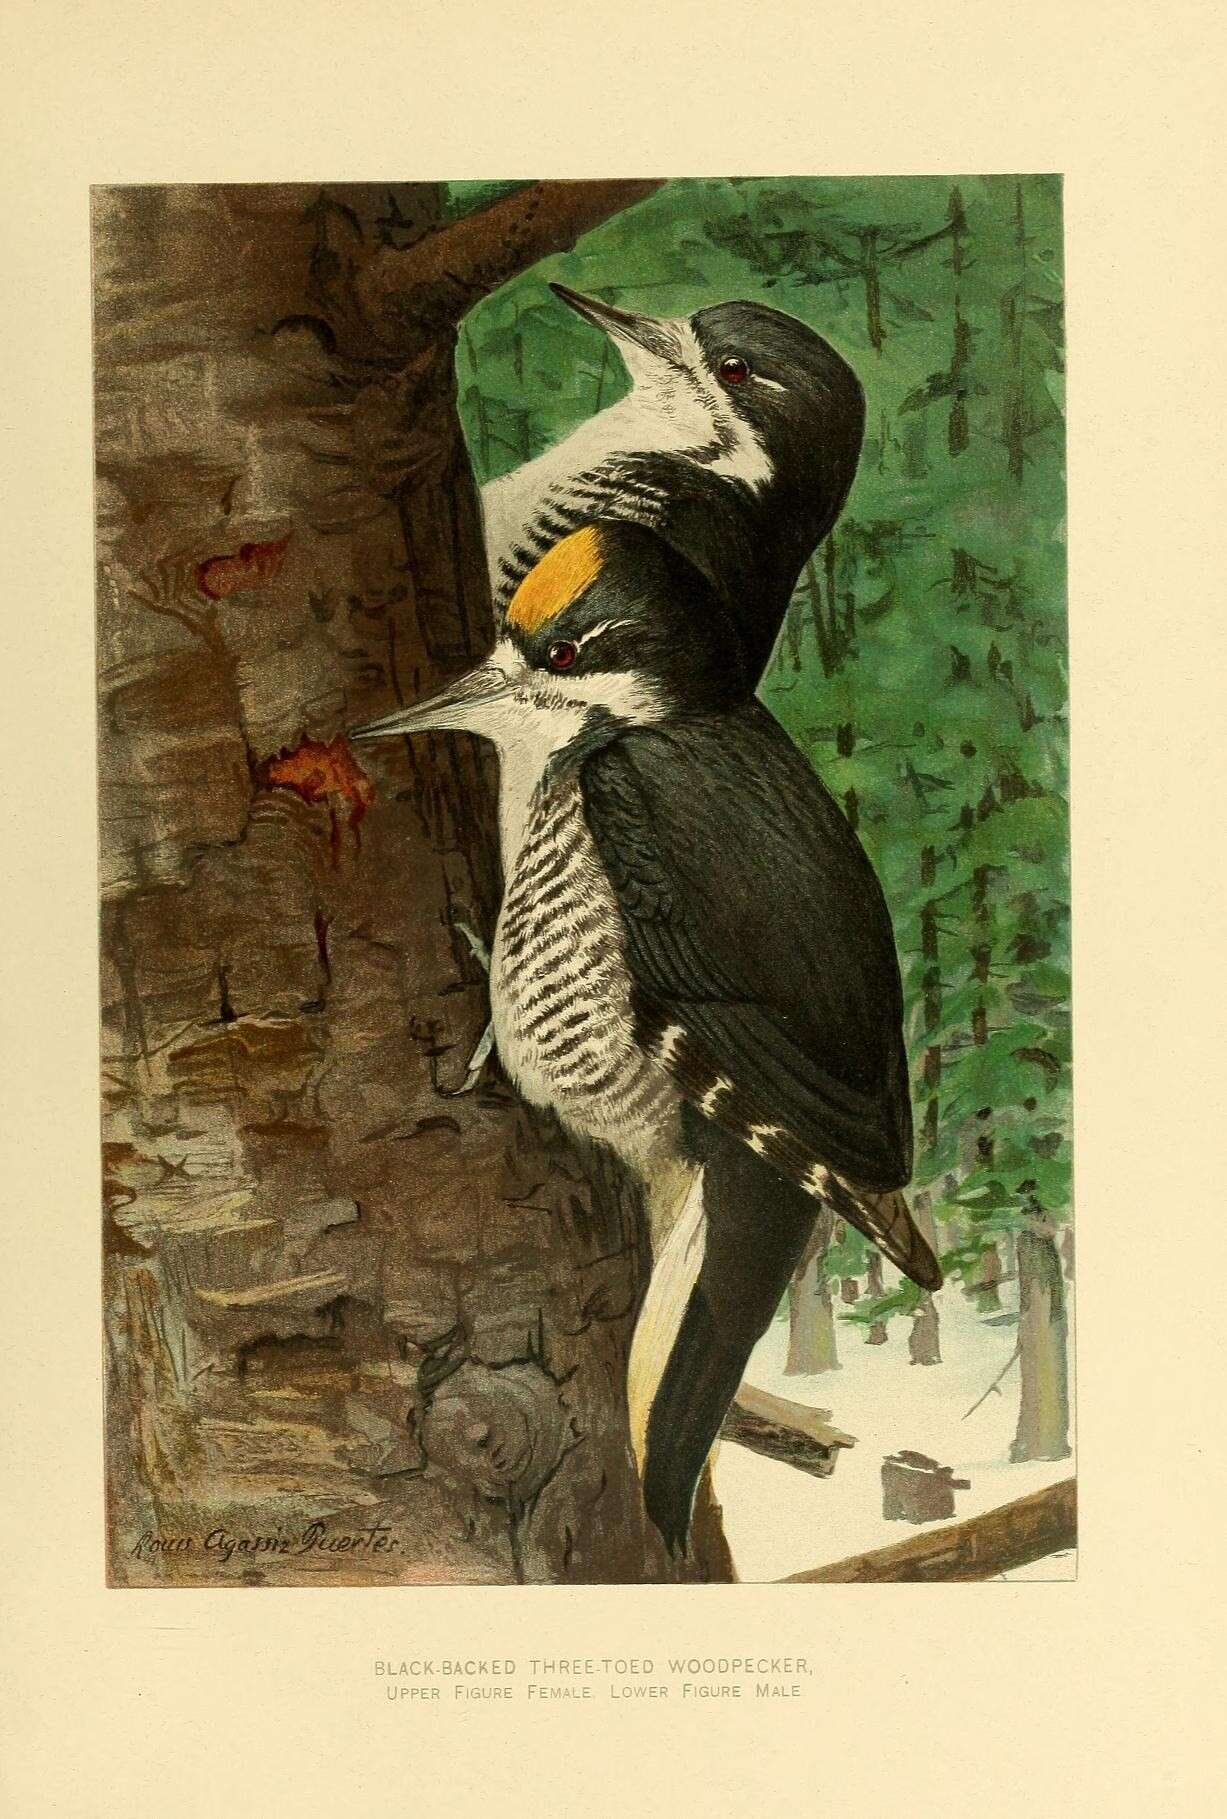 Image of pied woodpeckers